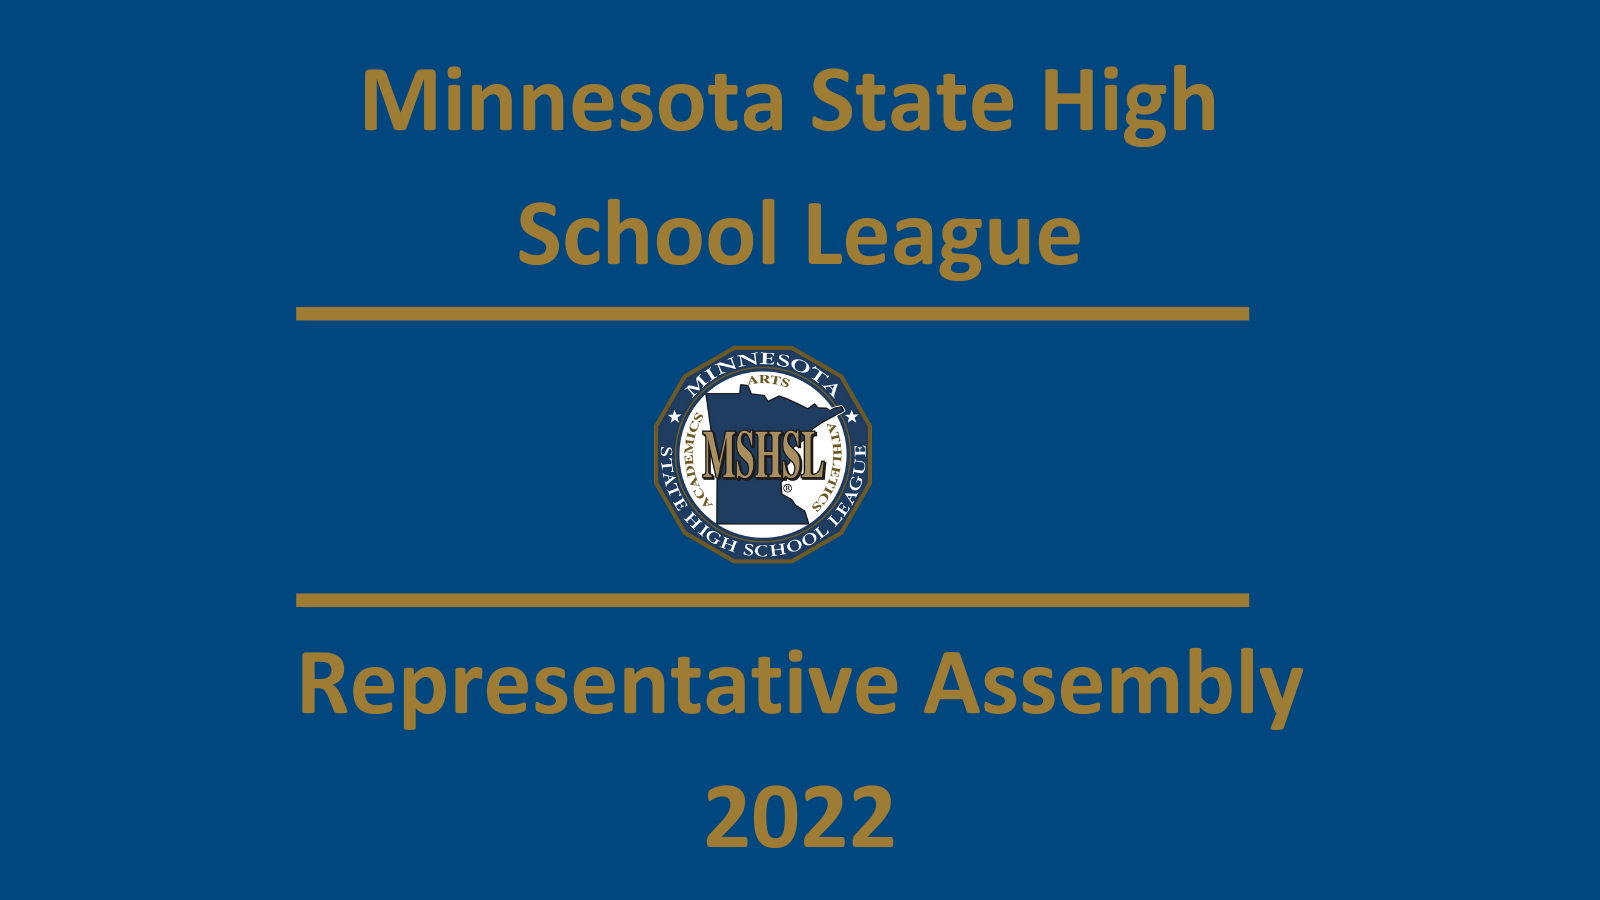 2022 Rep Assembly